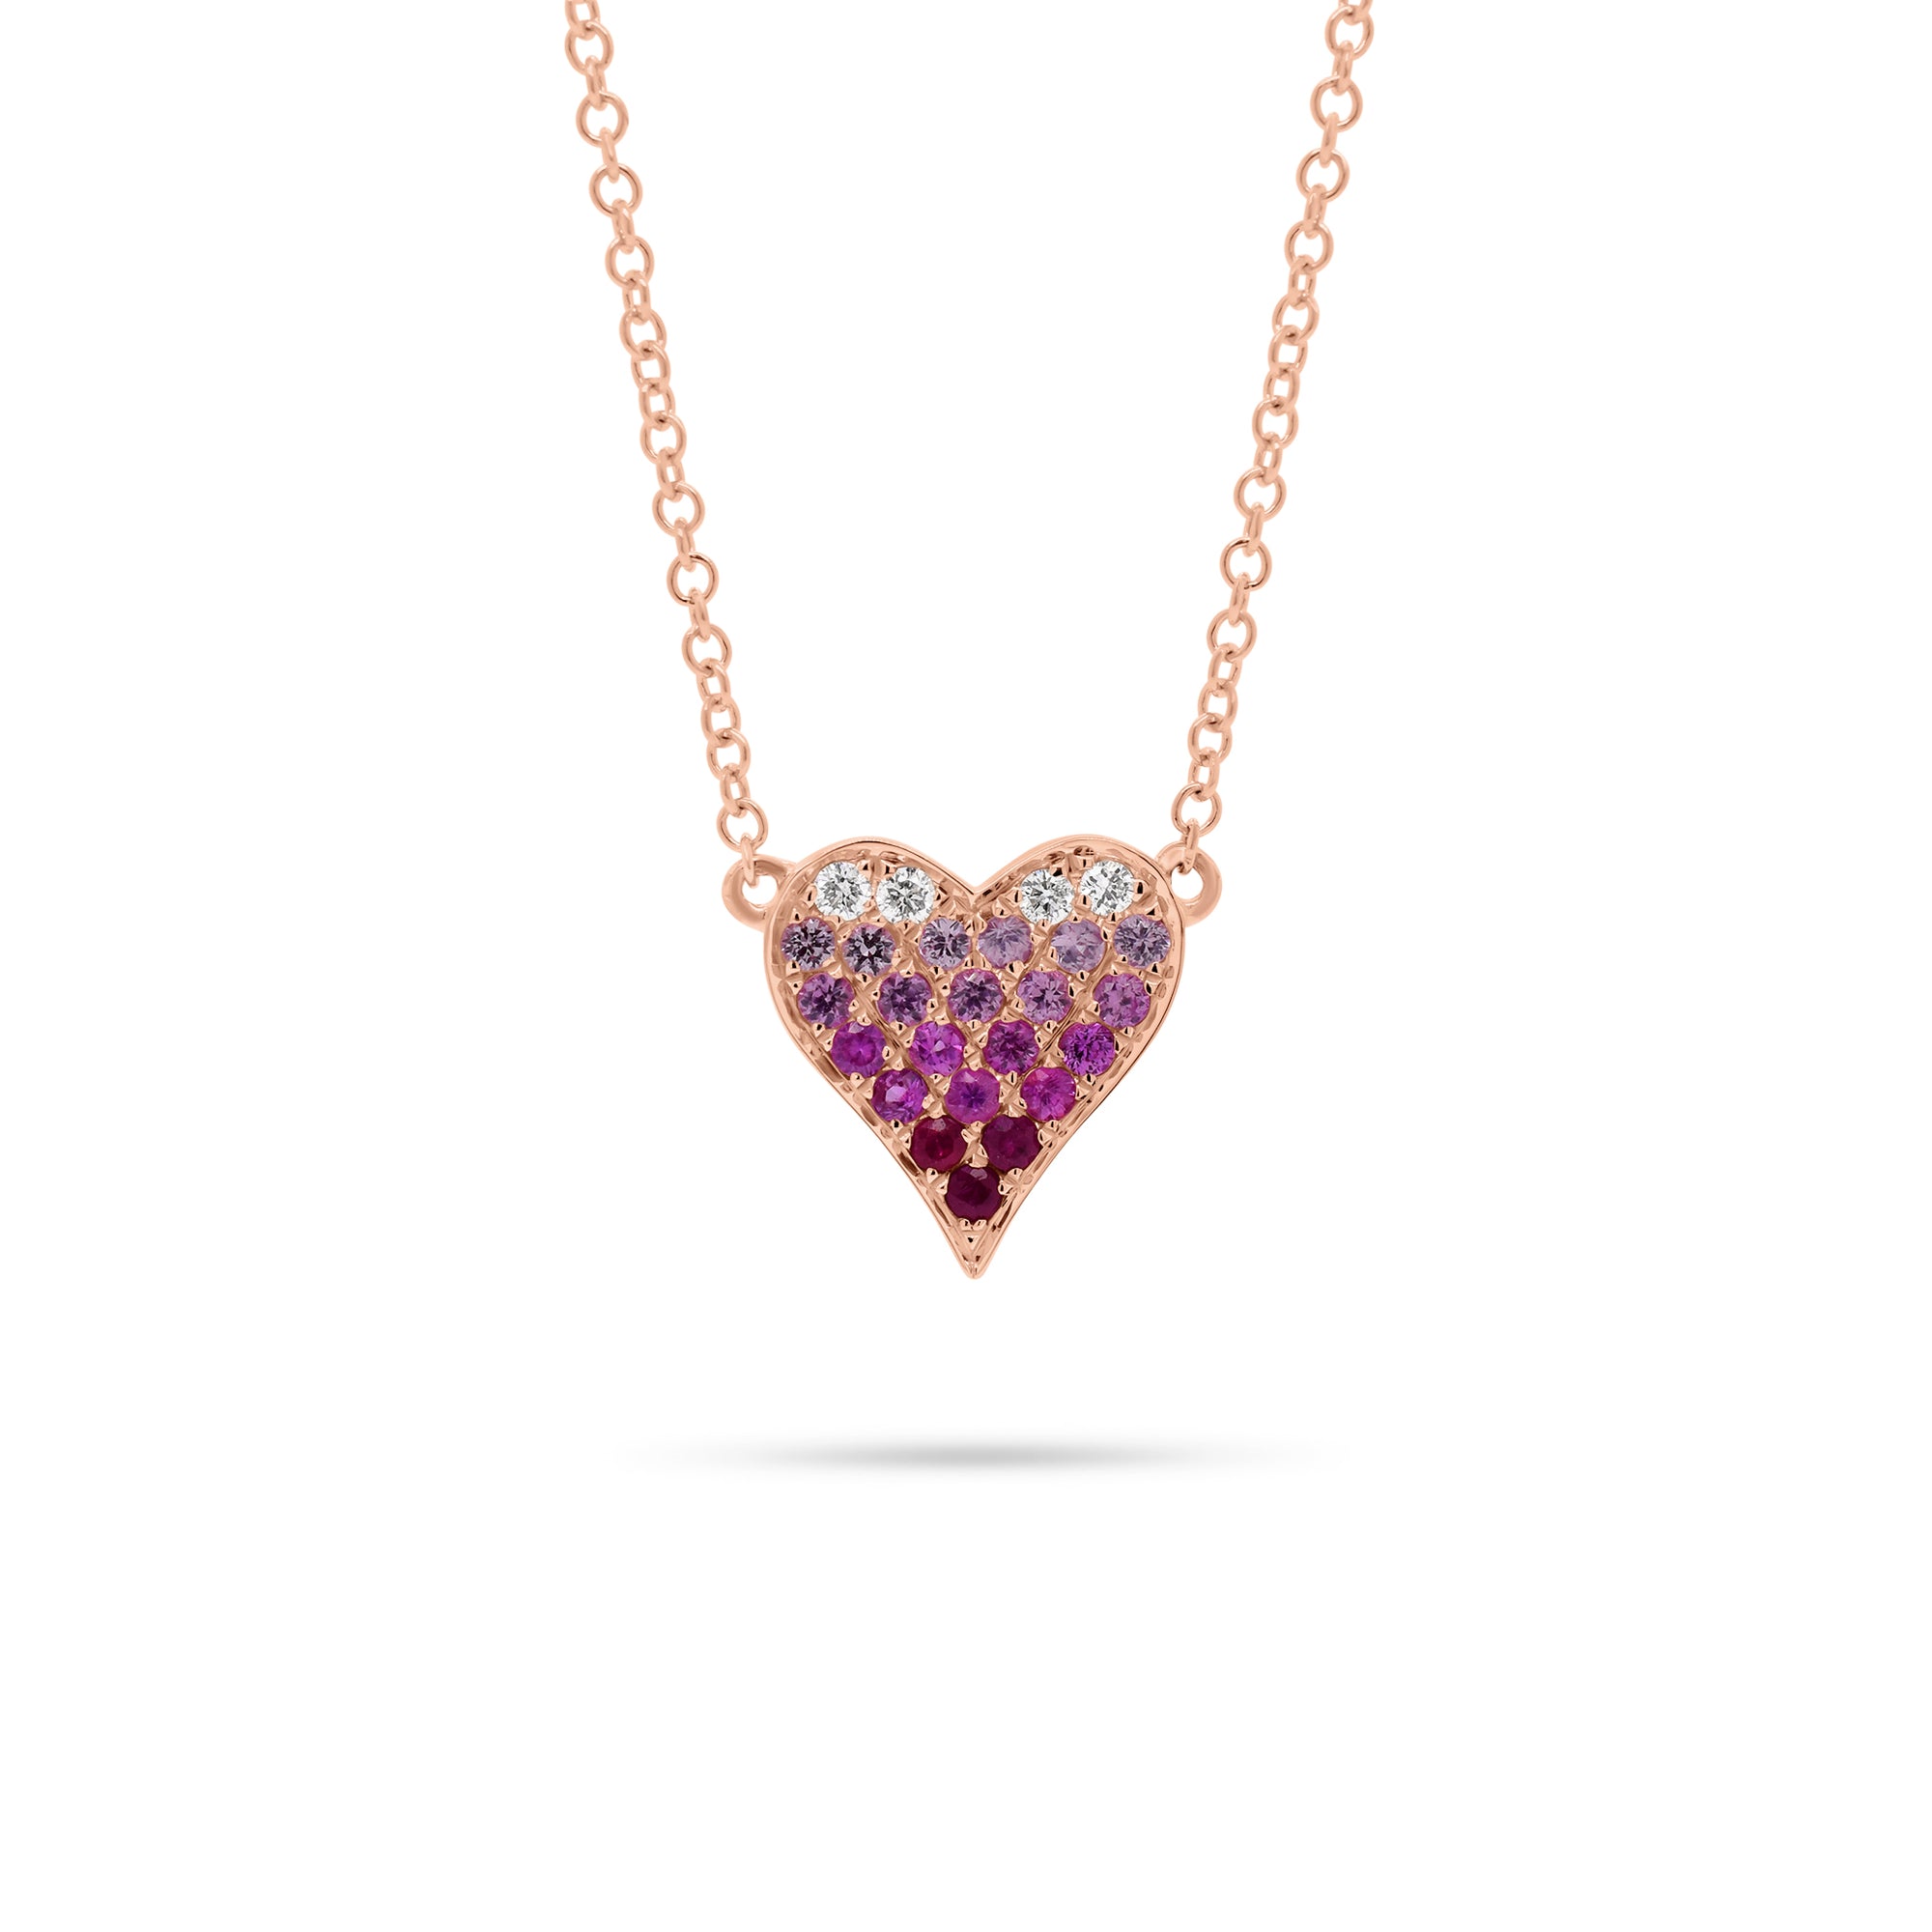 Pink Sapphire & Diamond Ombré Heart Pendant  - 14K rose gold weighing 1.98 grams  - 4 round diamonds totaling 0.05 carats  - 21 pink sapphires totaling 0.24 carats